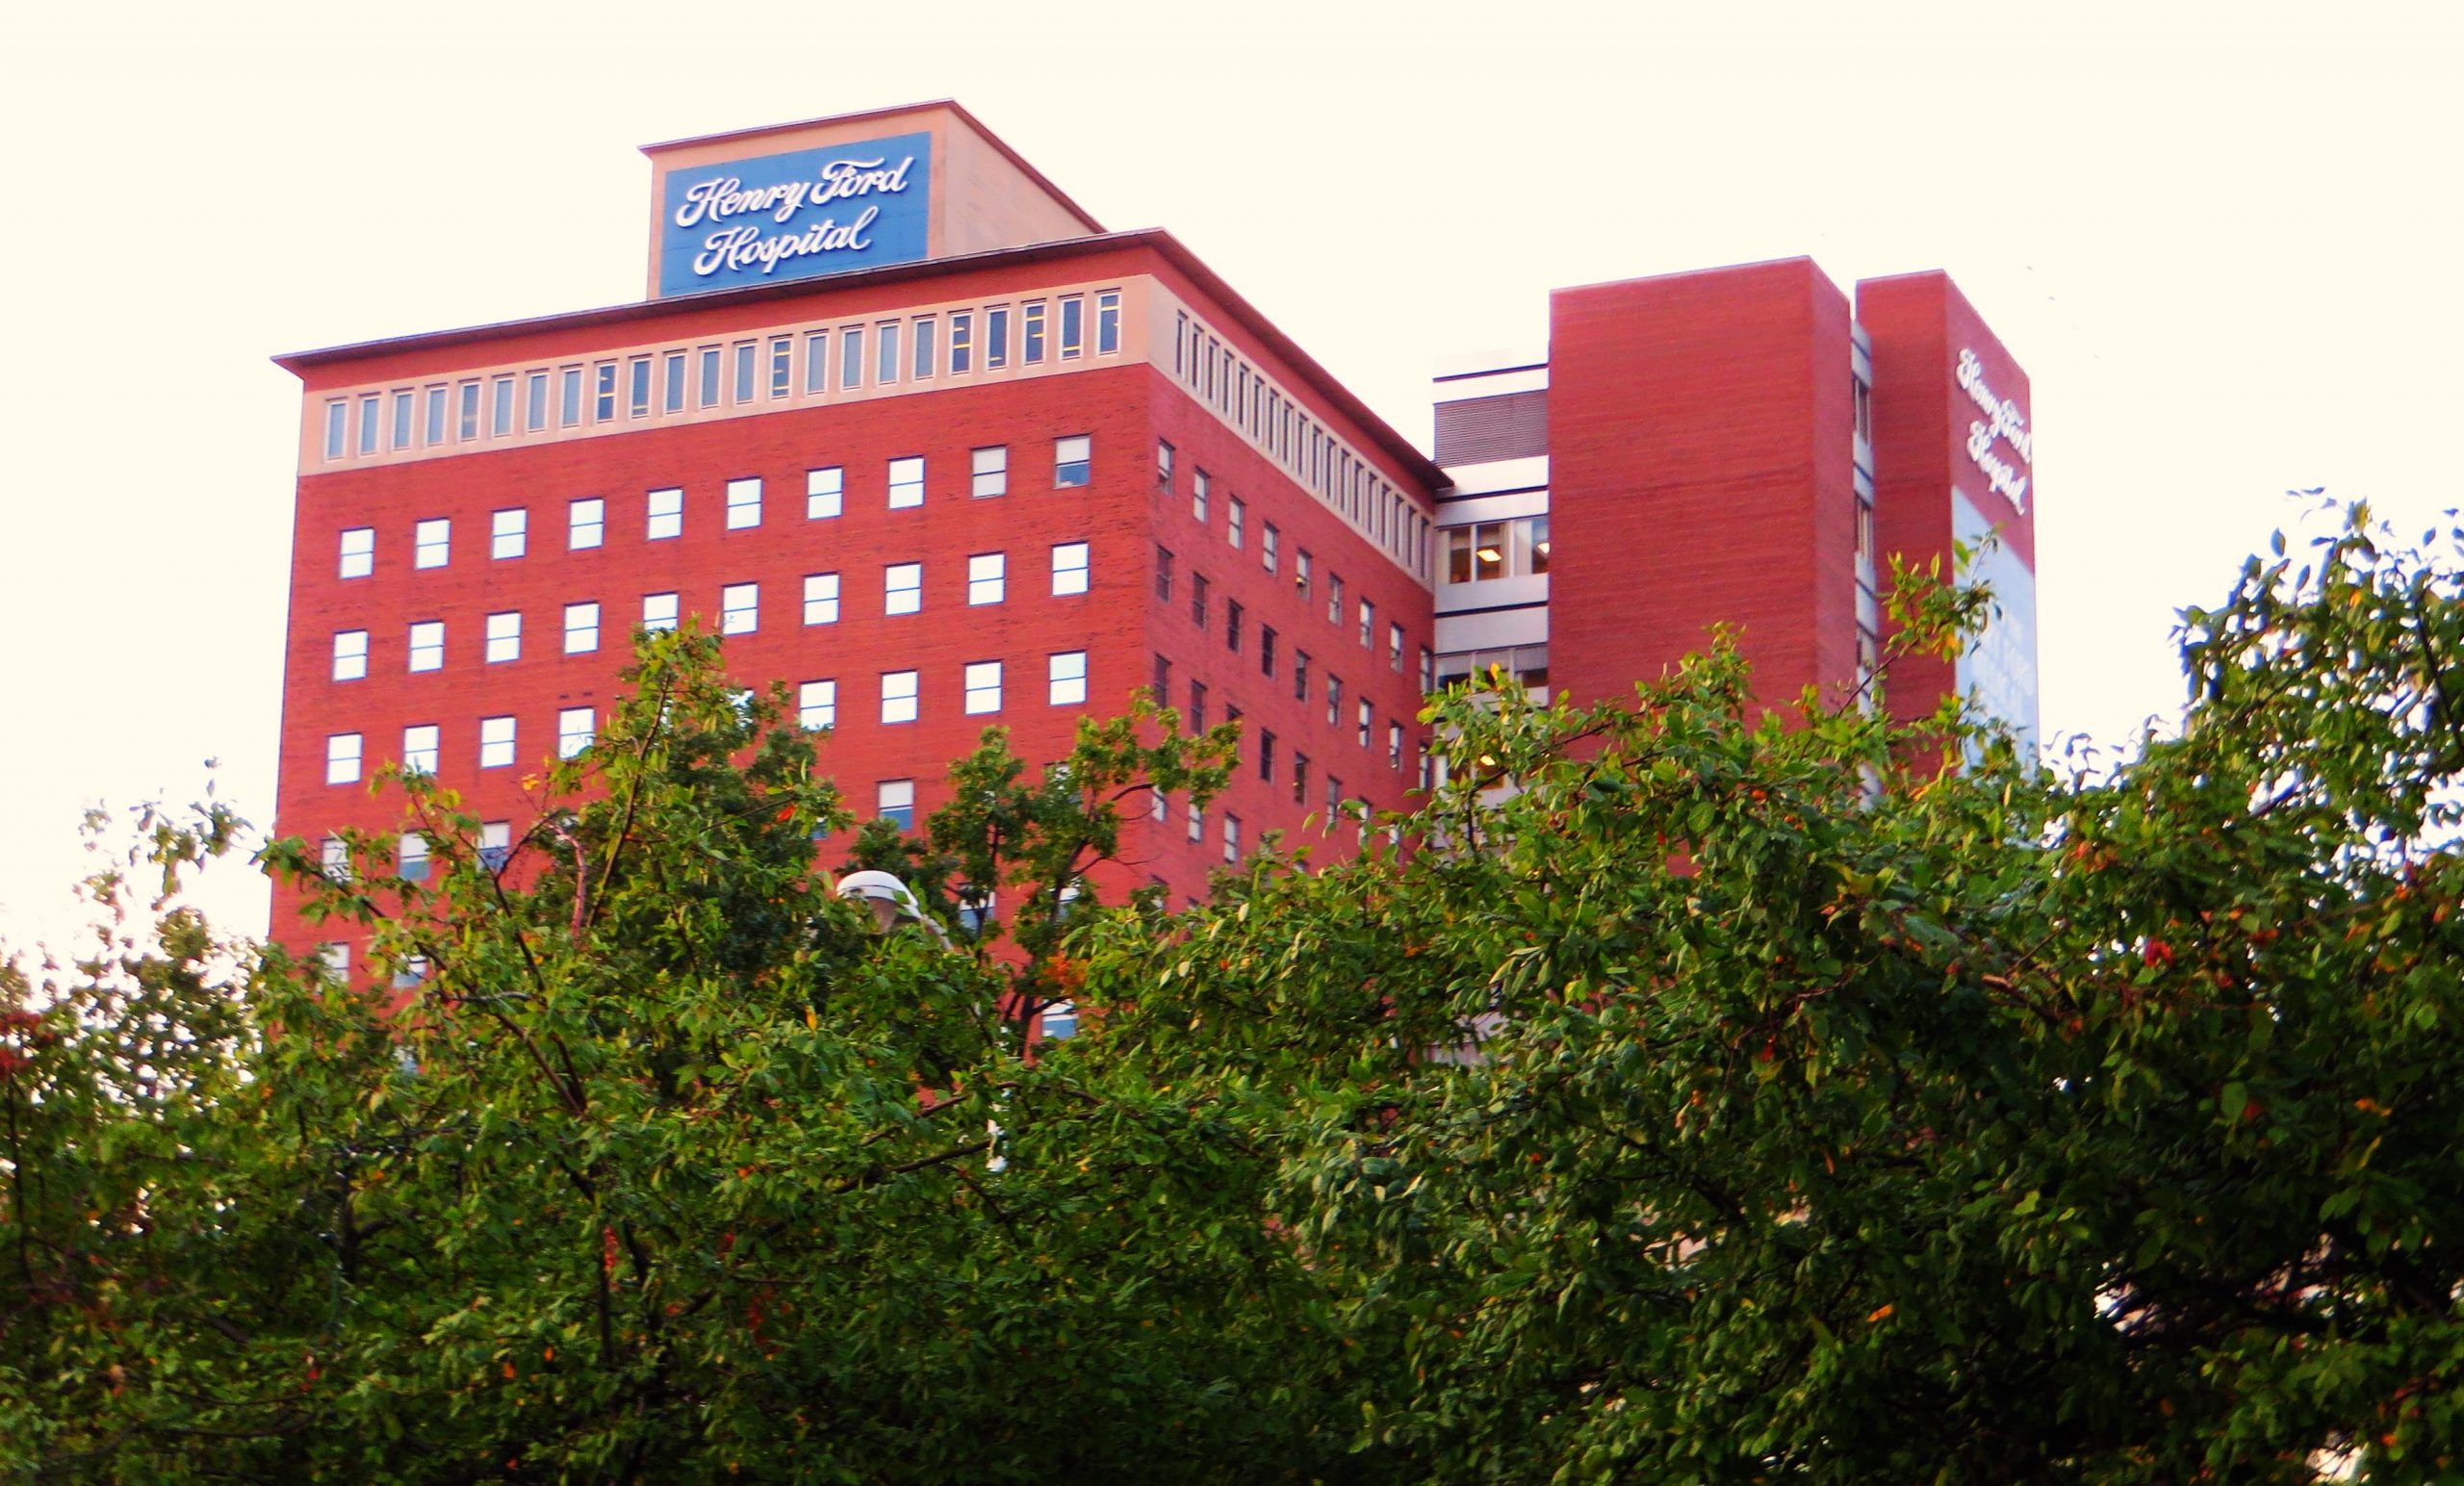 view from distance of large brick building with sign reading Henry Ford Hospital and tall trees in foreground